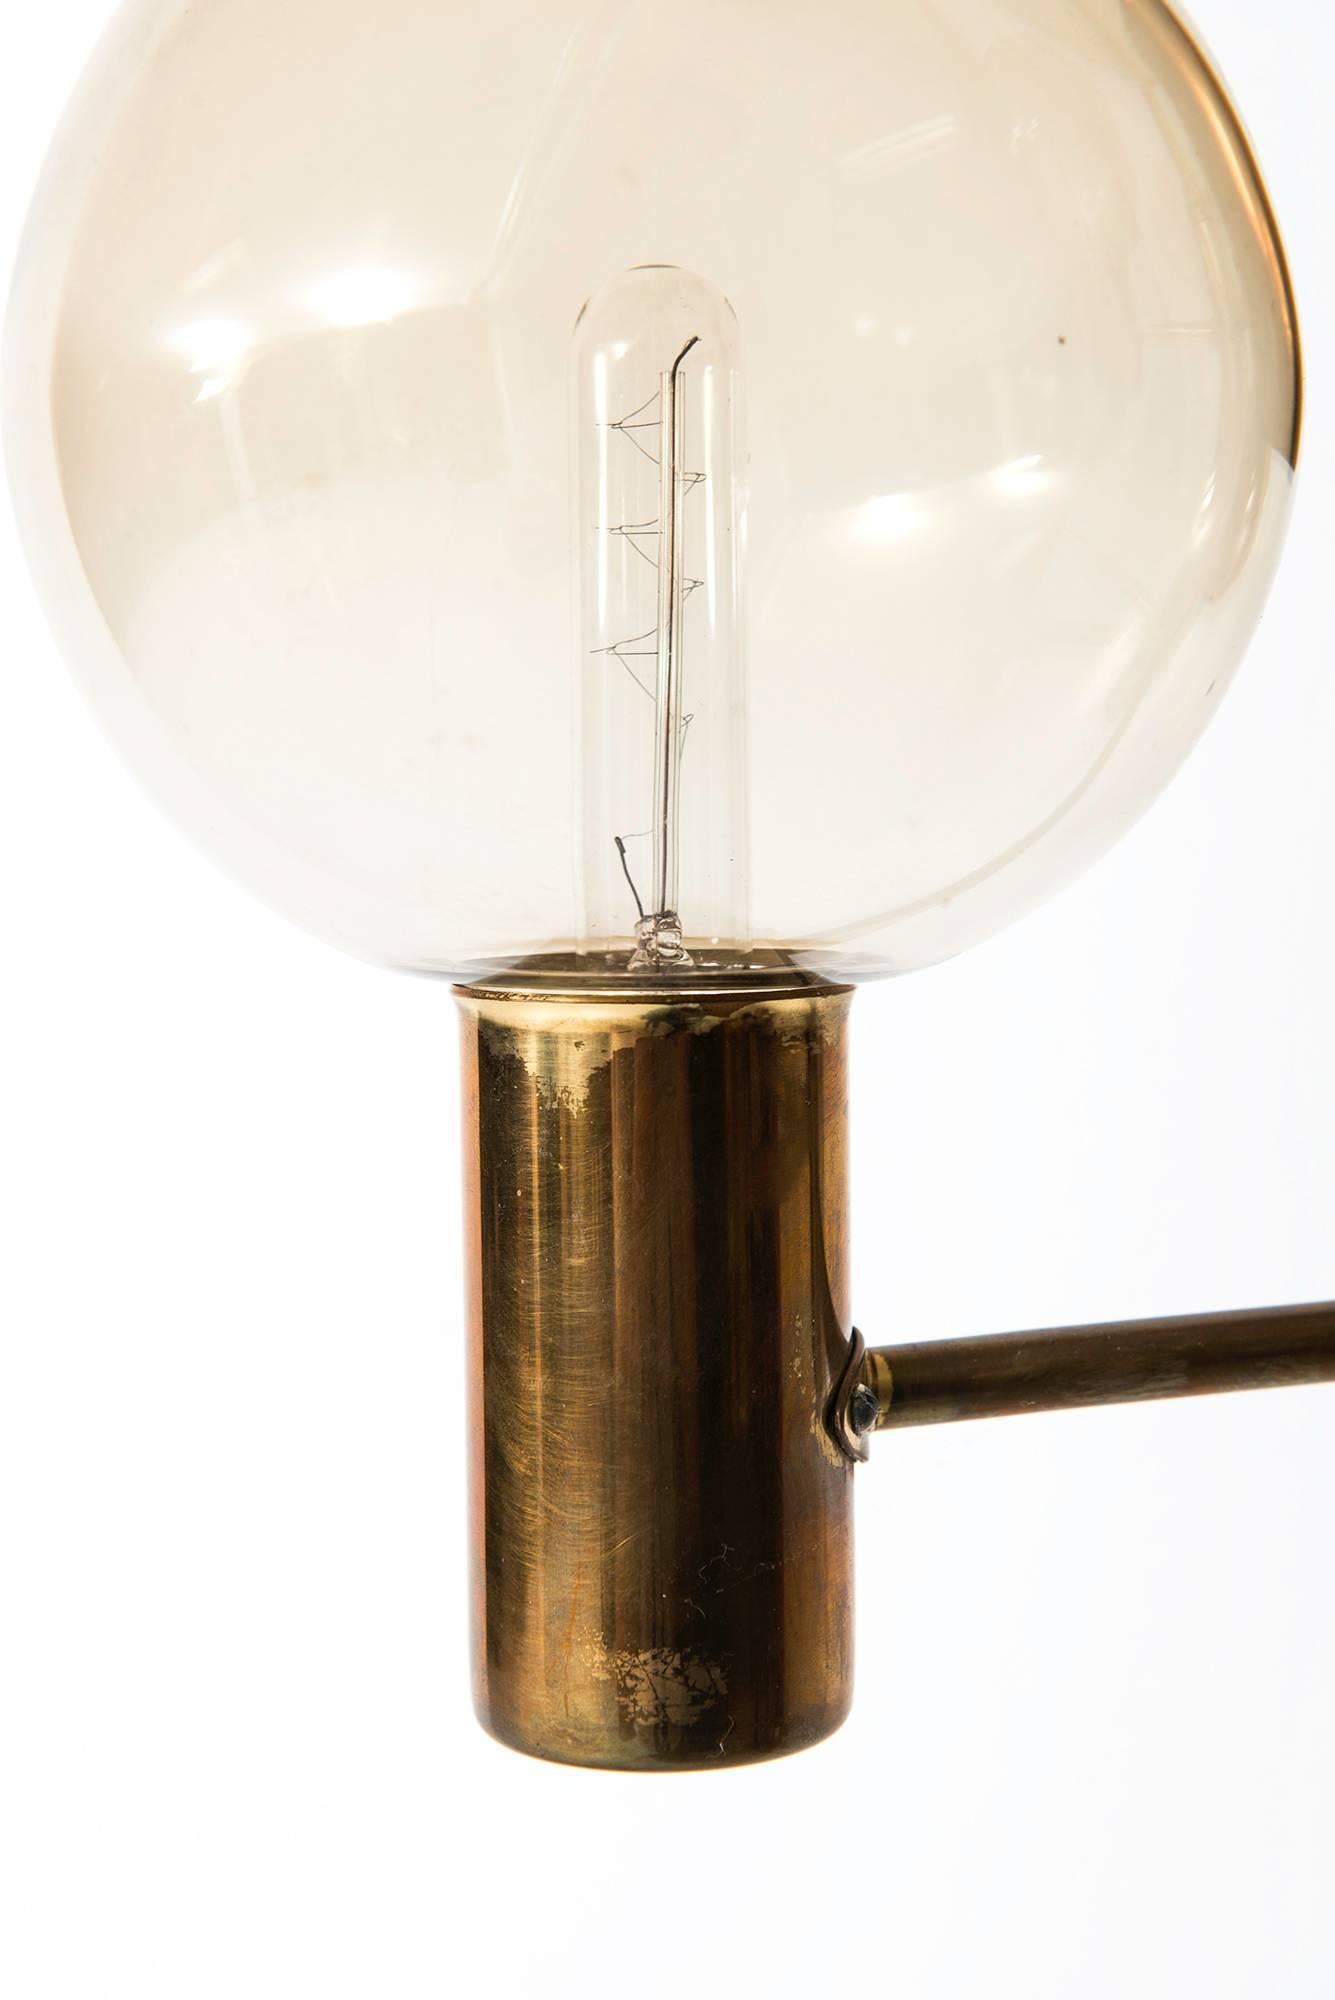 Rare and early wall lamp model V-287 designed by Hans-Agne Jakobsson. Produced by Hans-Agne Jakobsson AB in Markaryd, Sweden.